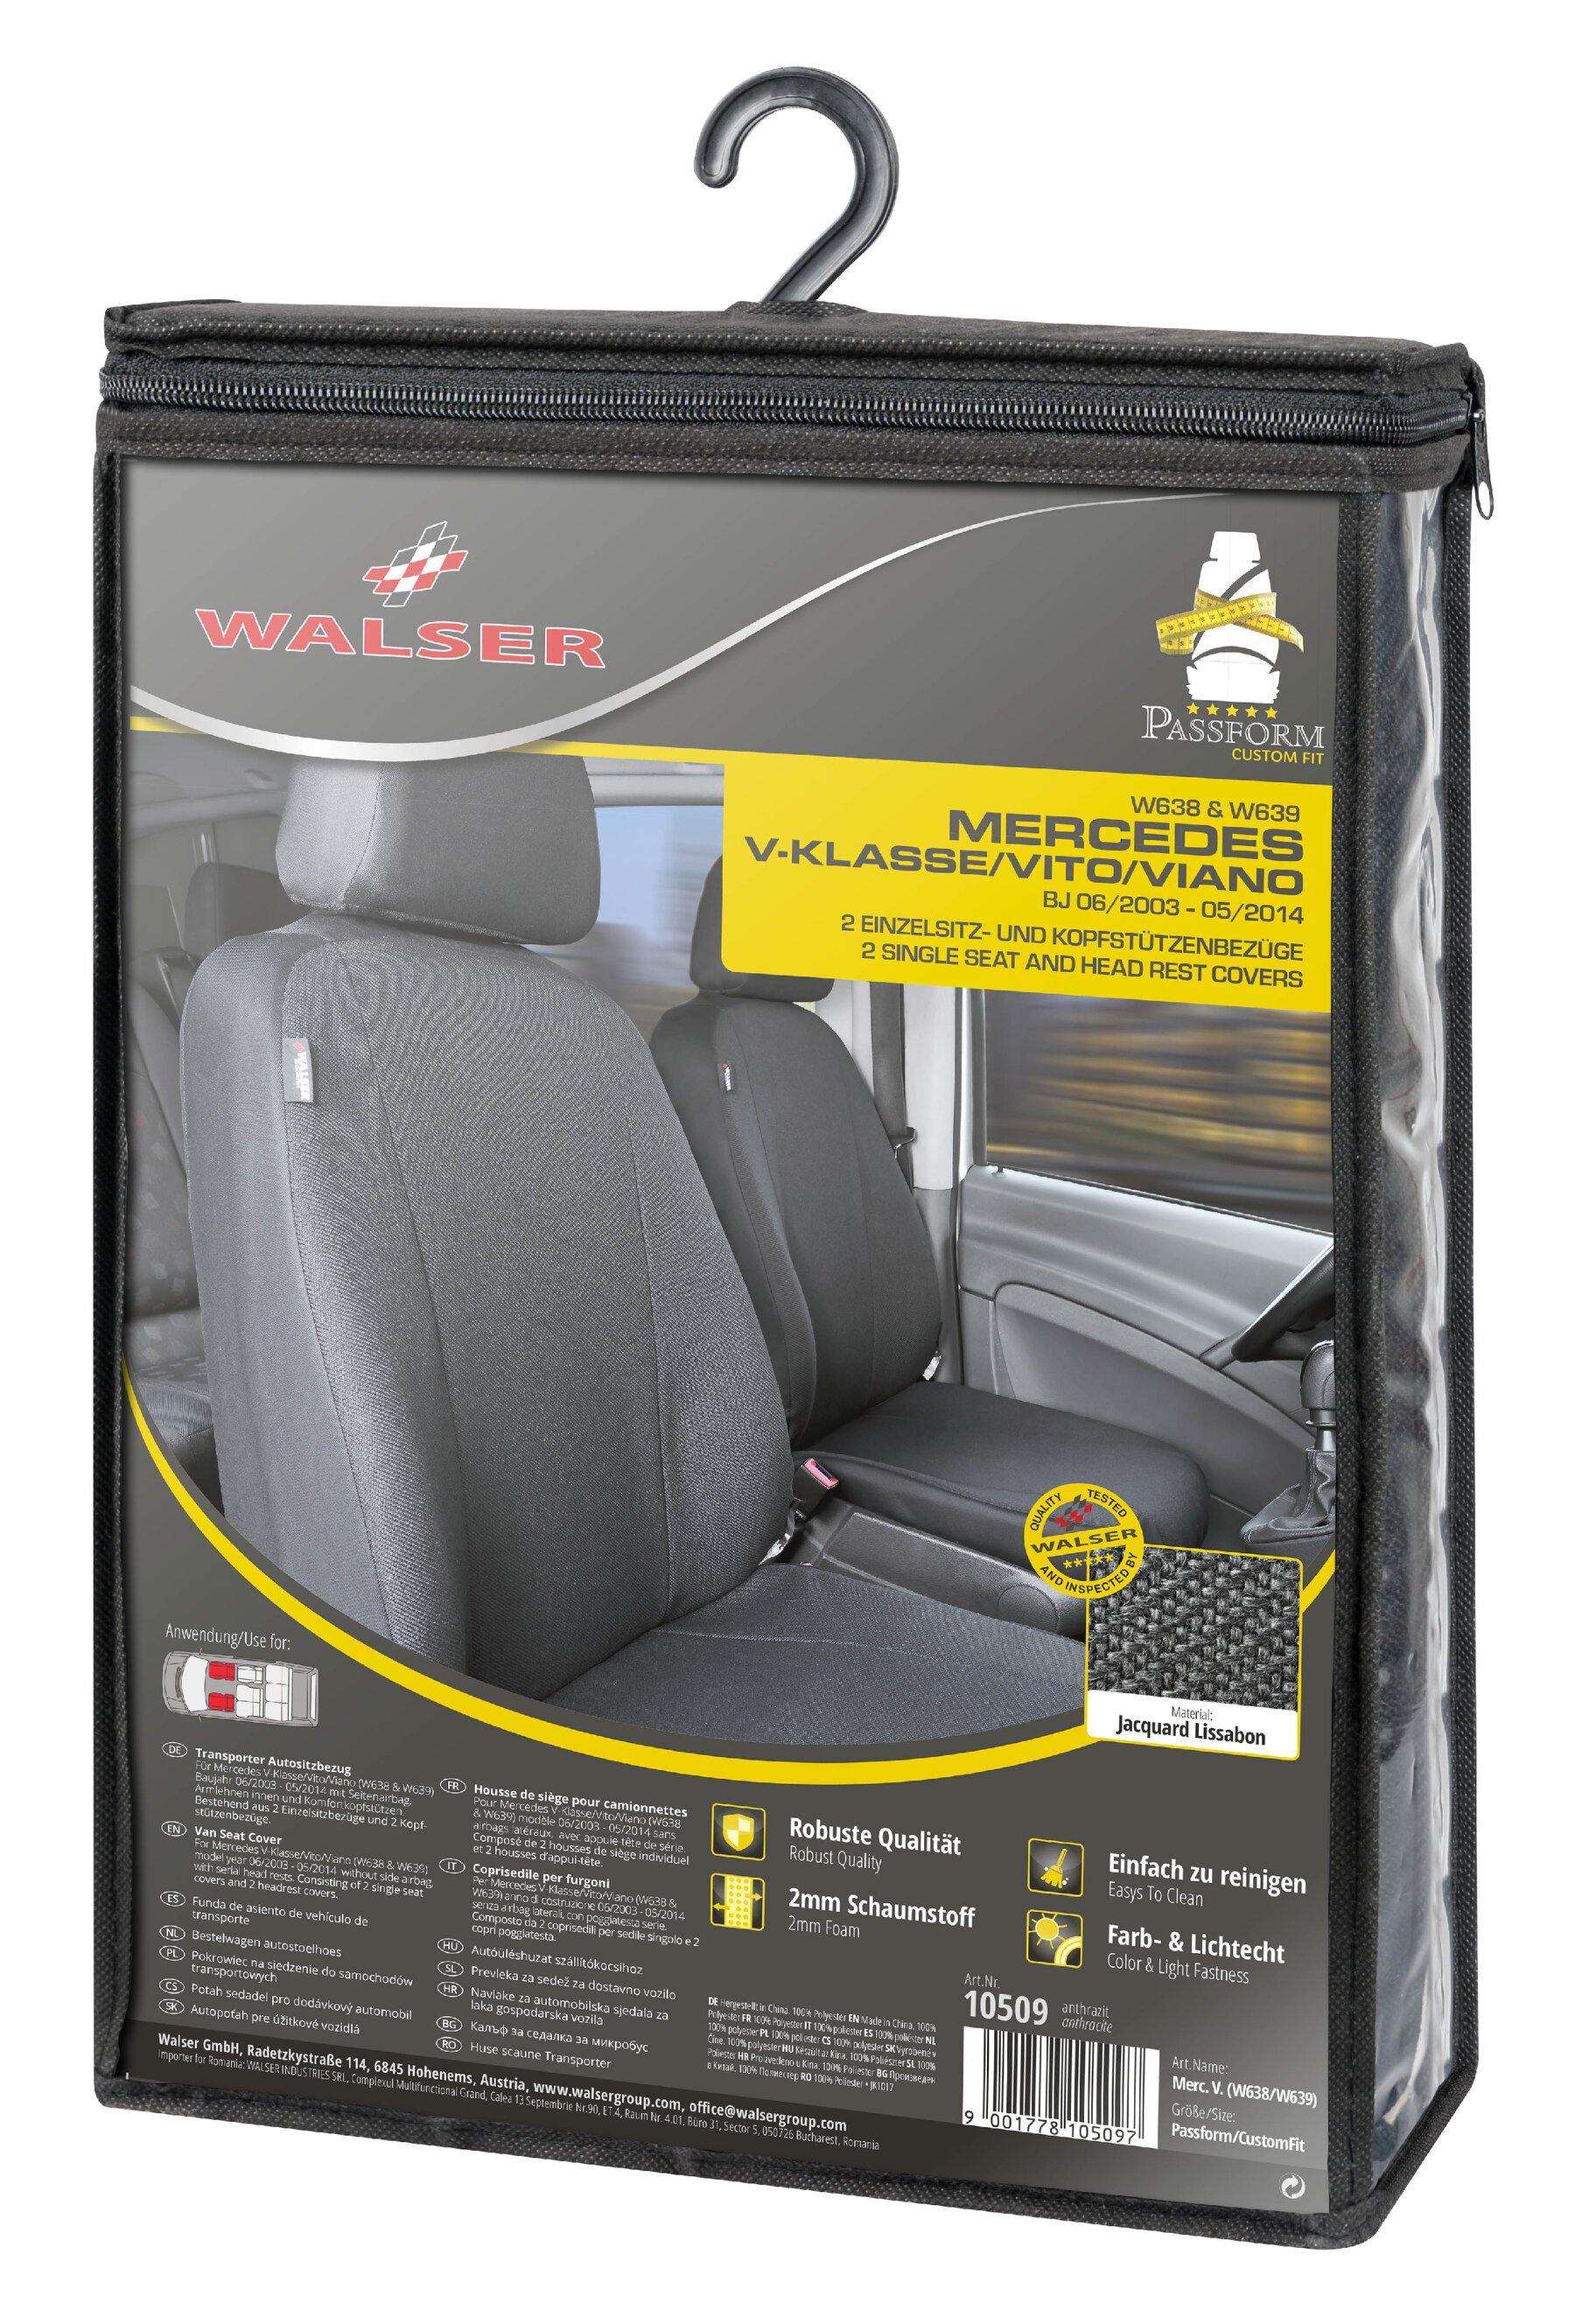 Seat cover made of fabric for Mercedes Vito/Viano, 2 single seat covers - no airbag